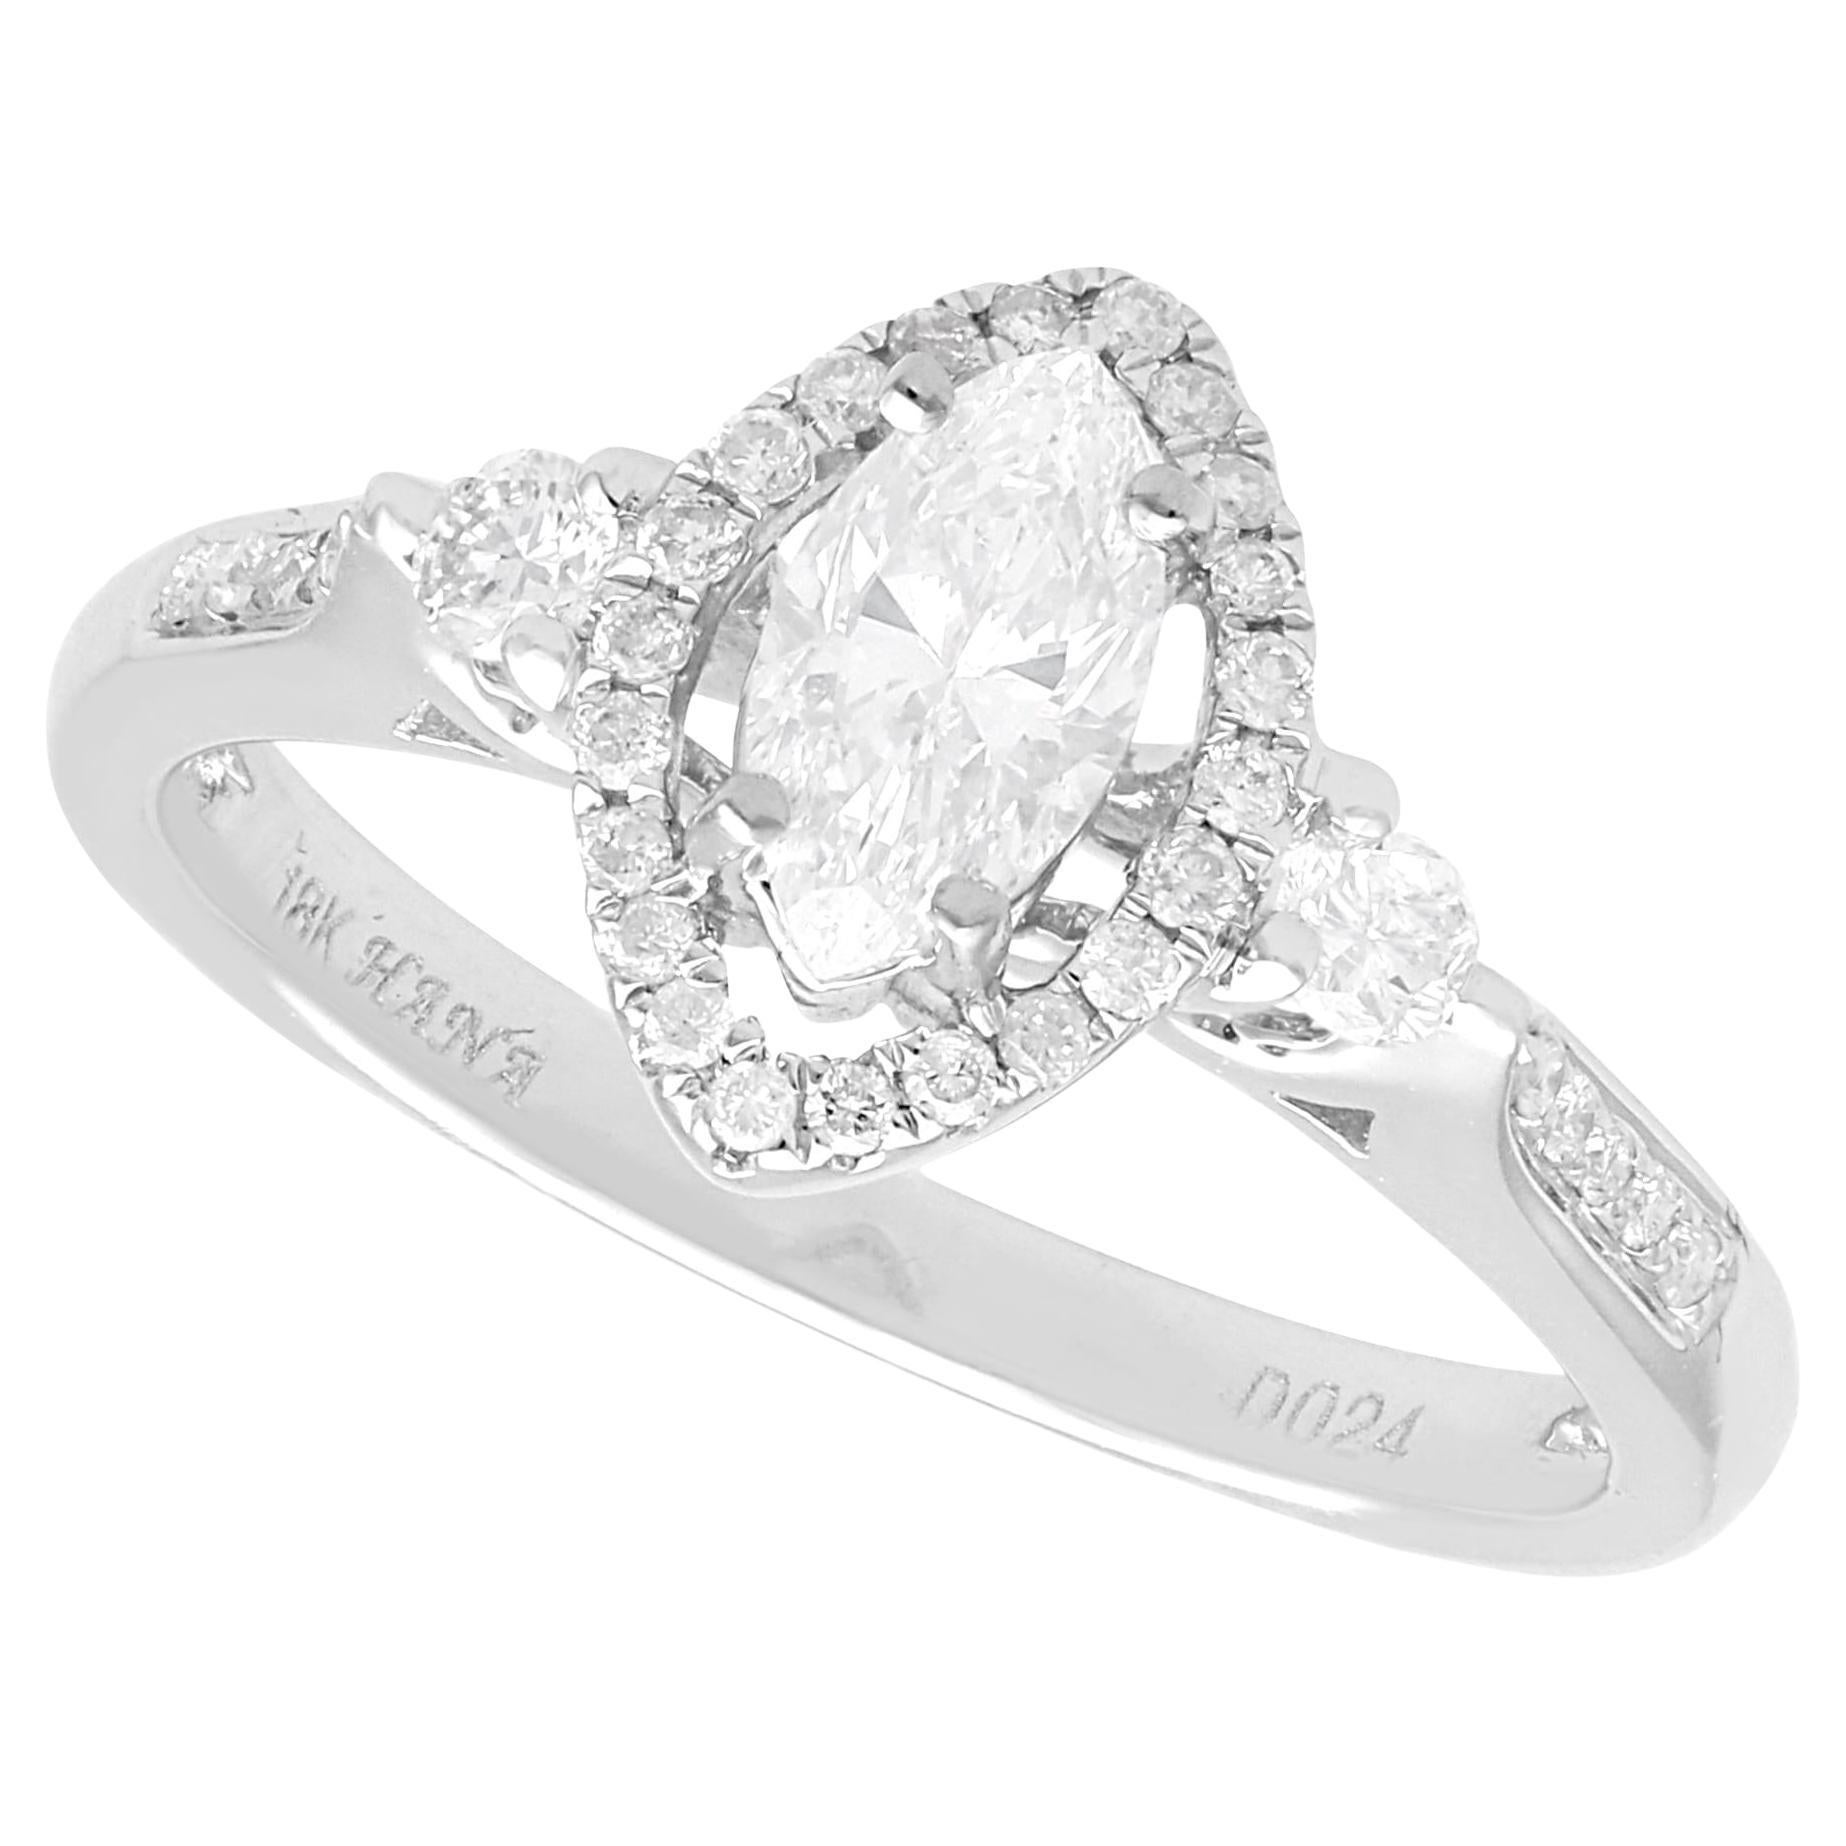 1980s 0.83 Carat Diamond and 18k White Gold Halo Ring For Sale